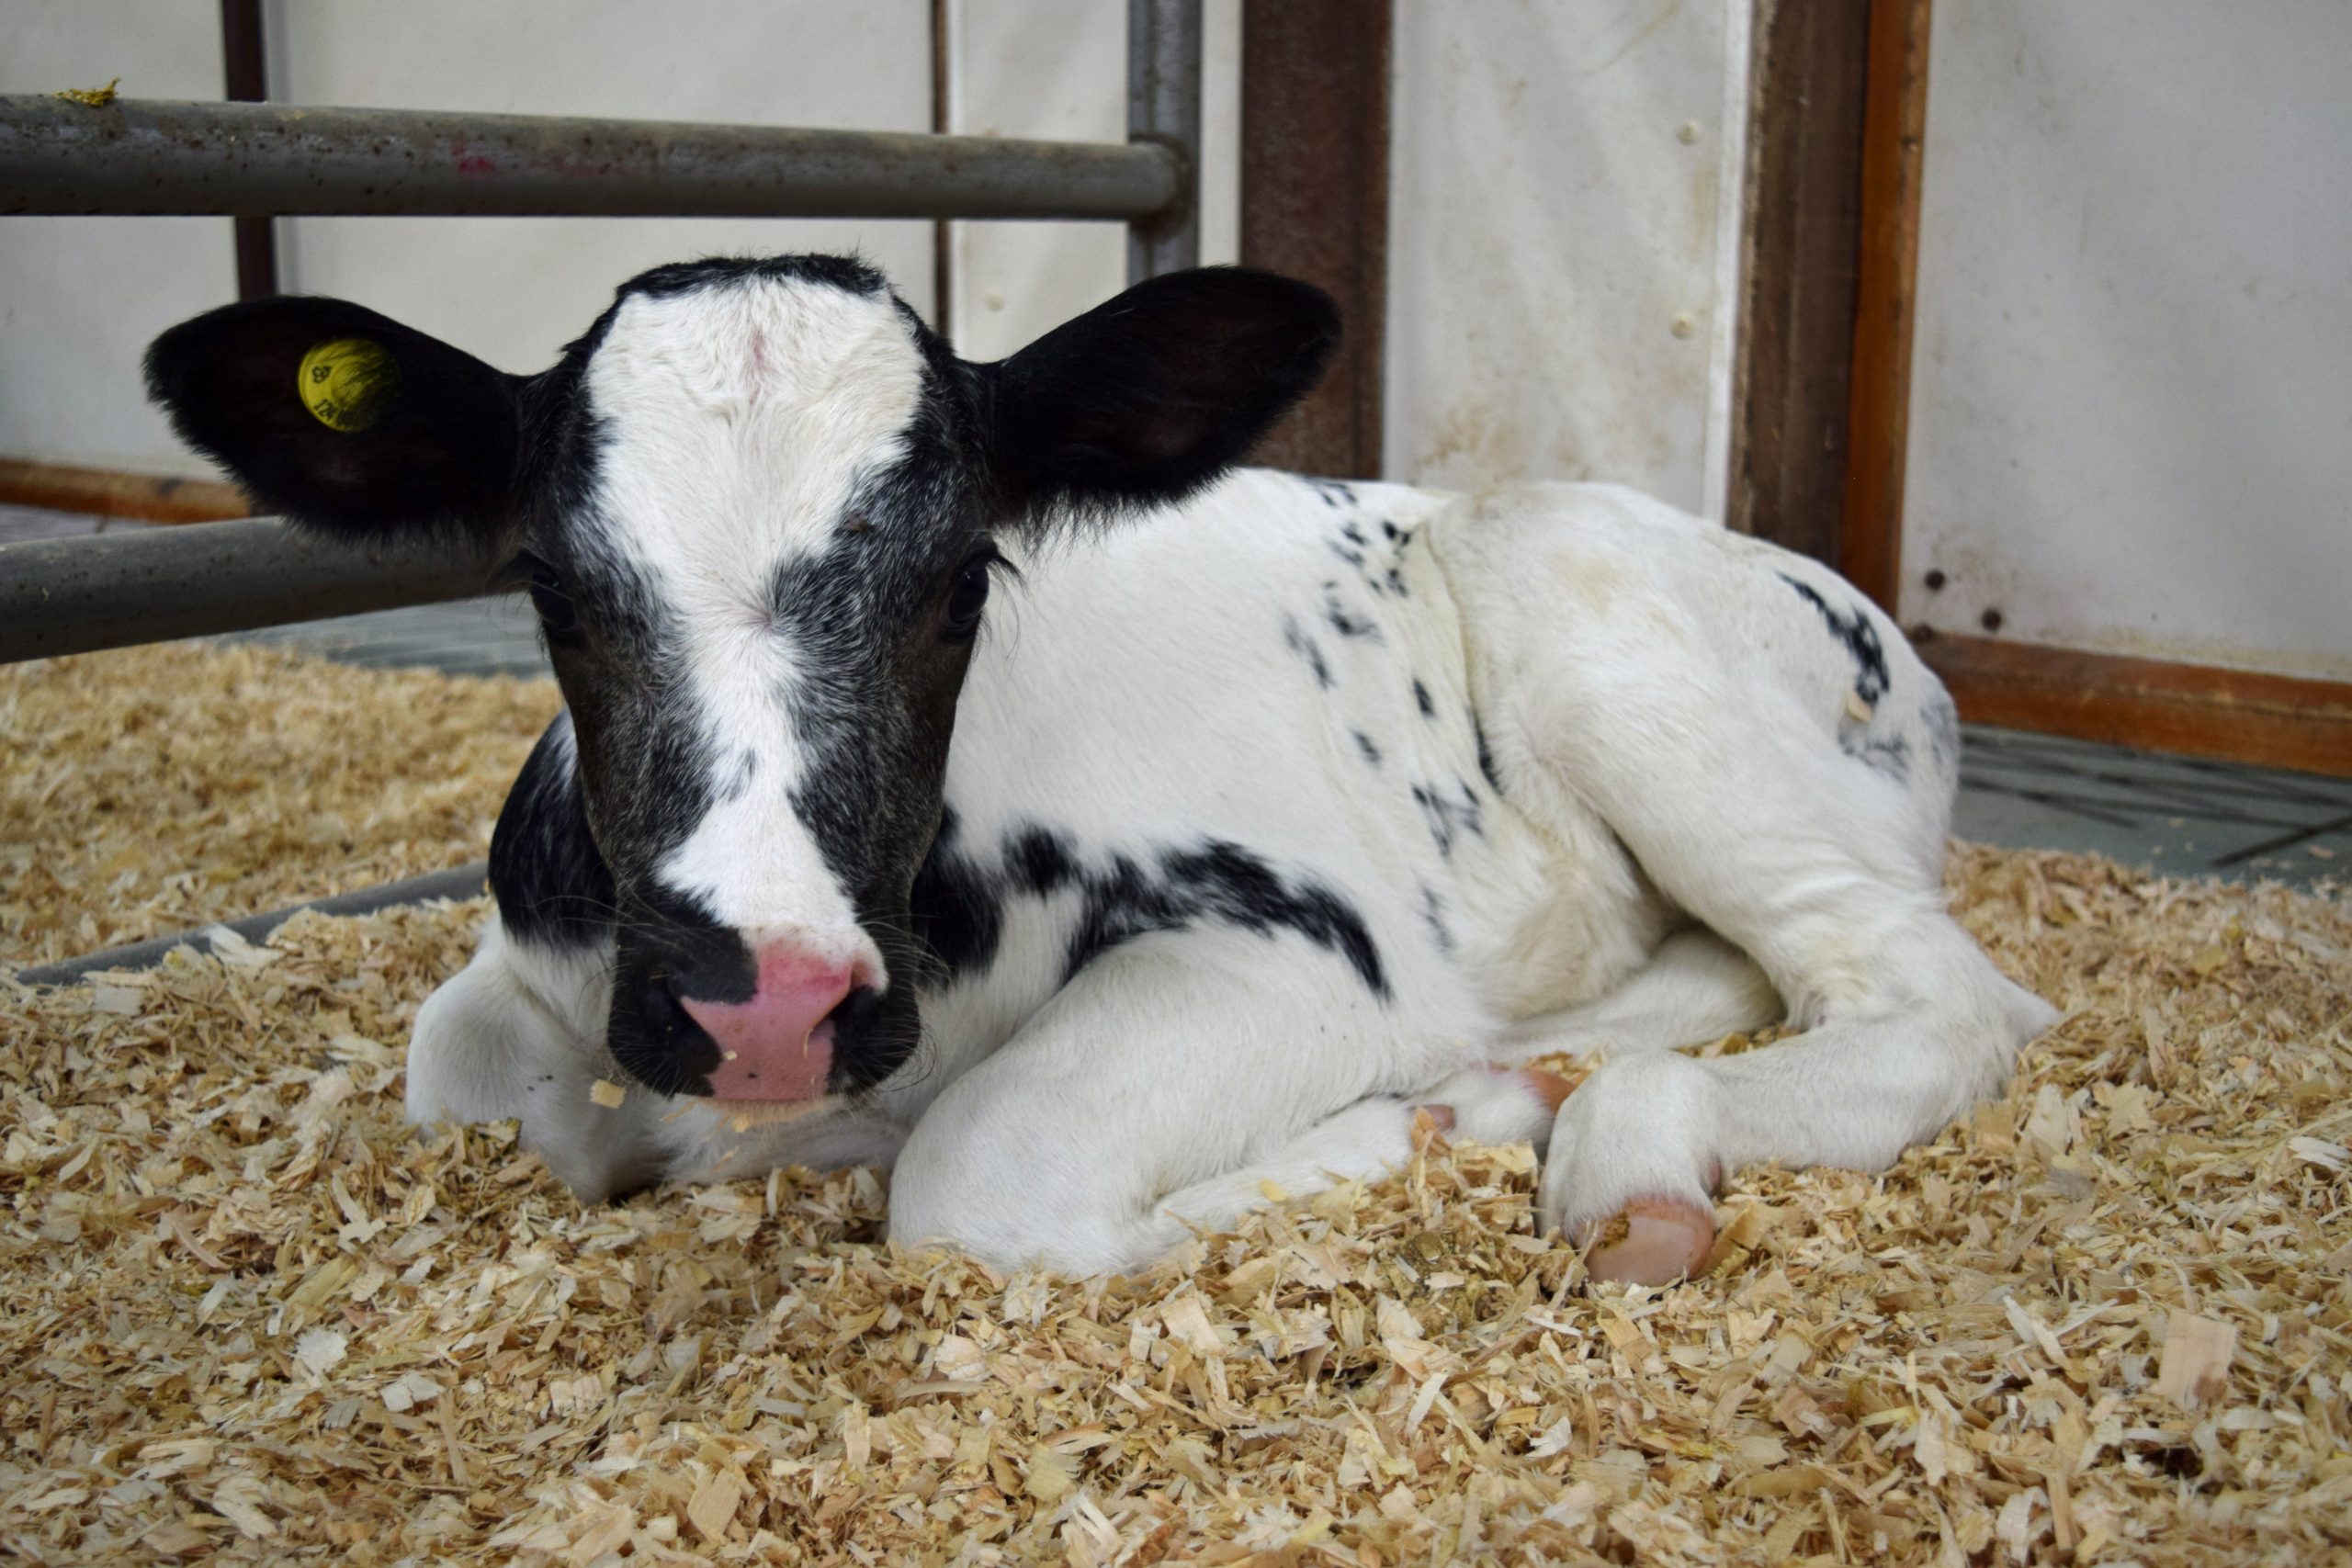 Back to basics calf care: Why good bedding is so important 